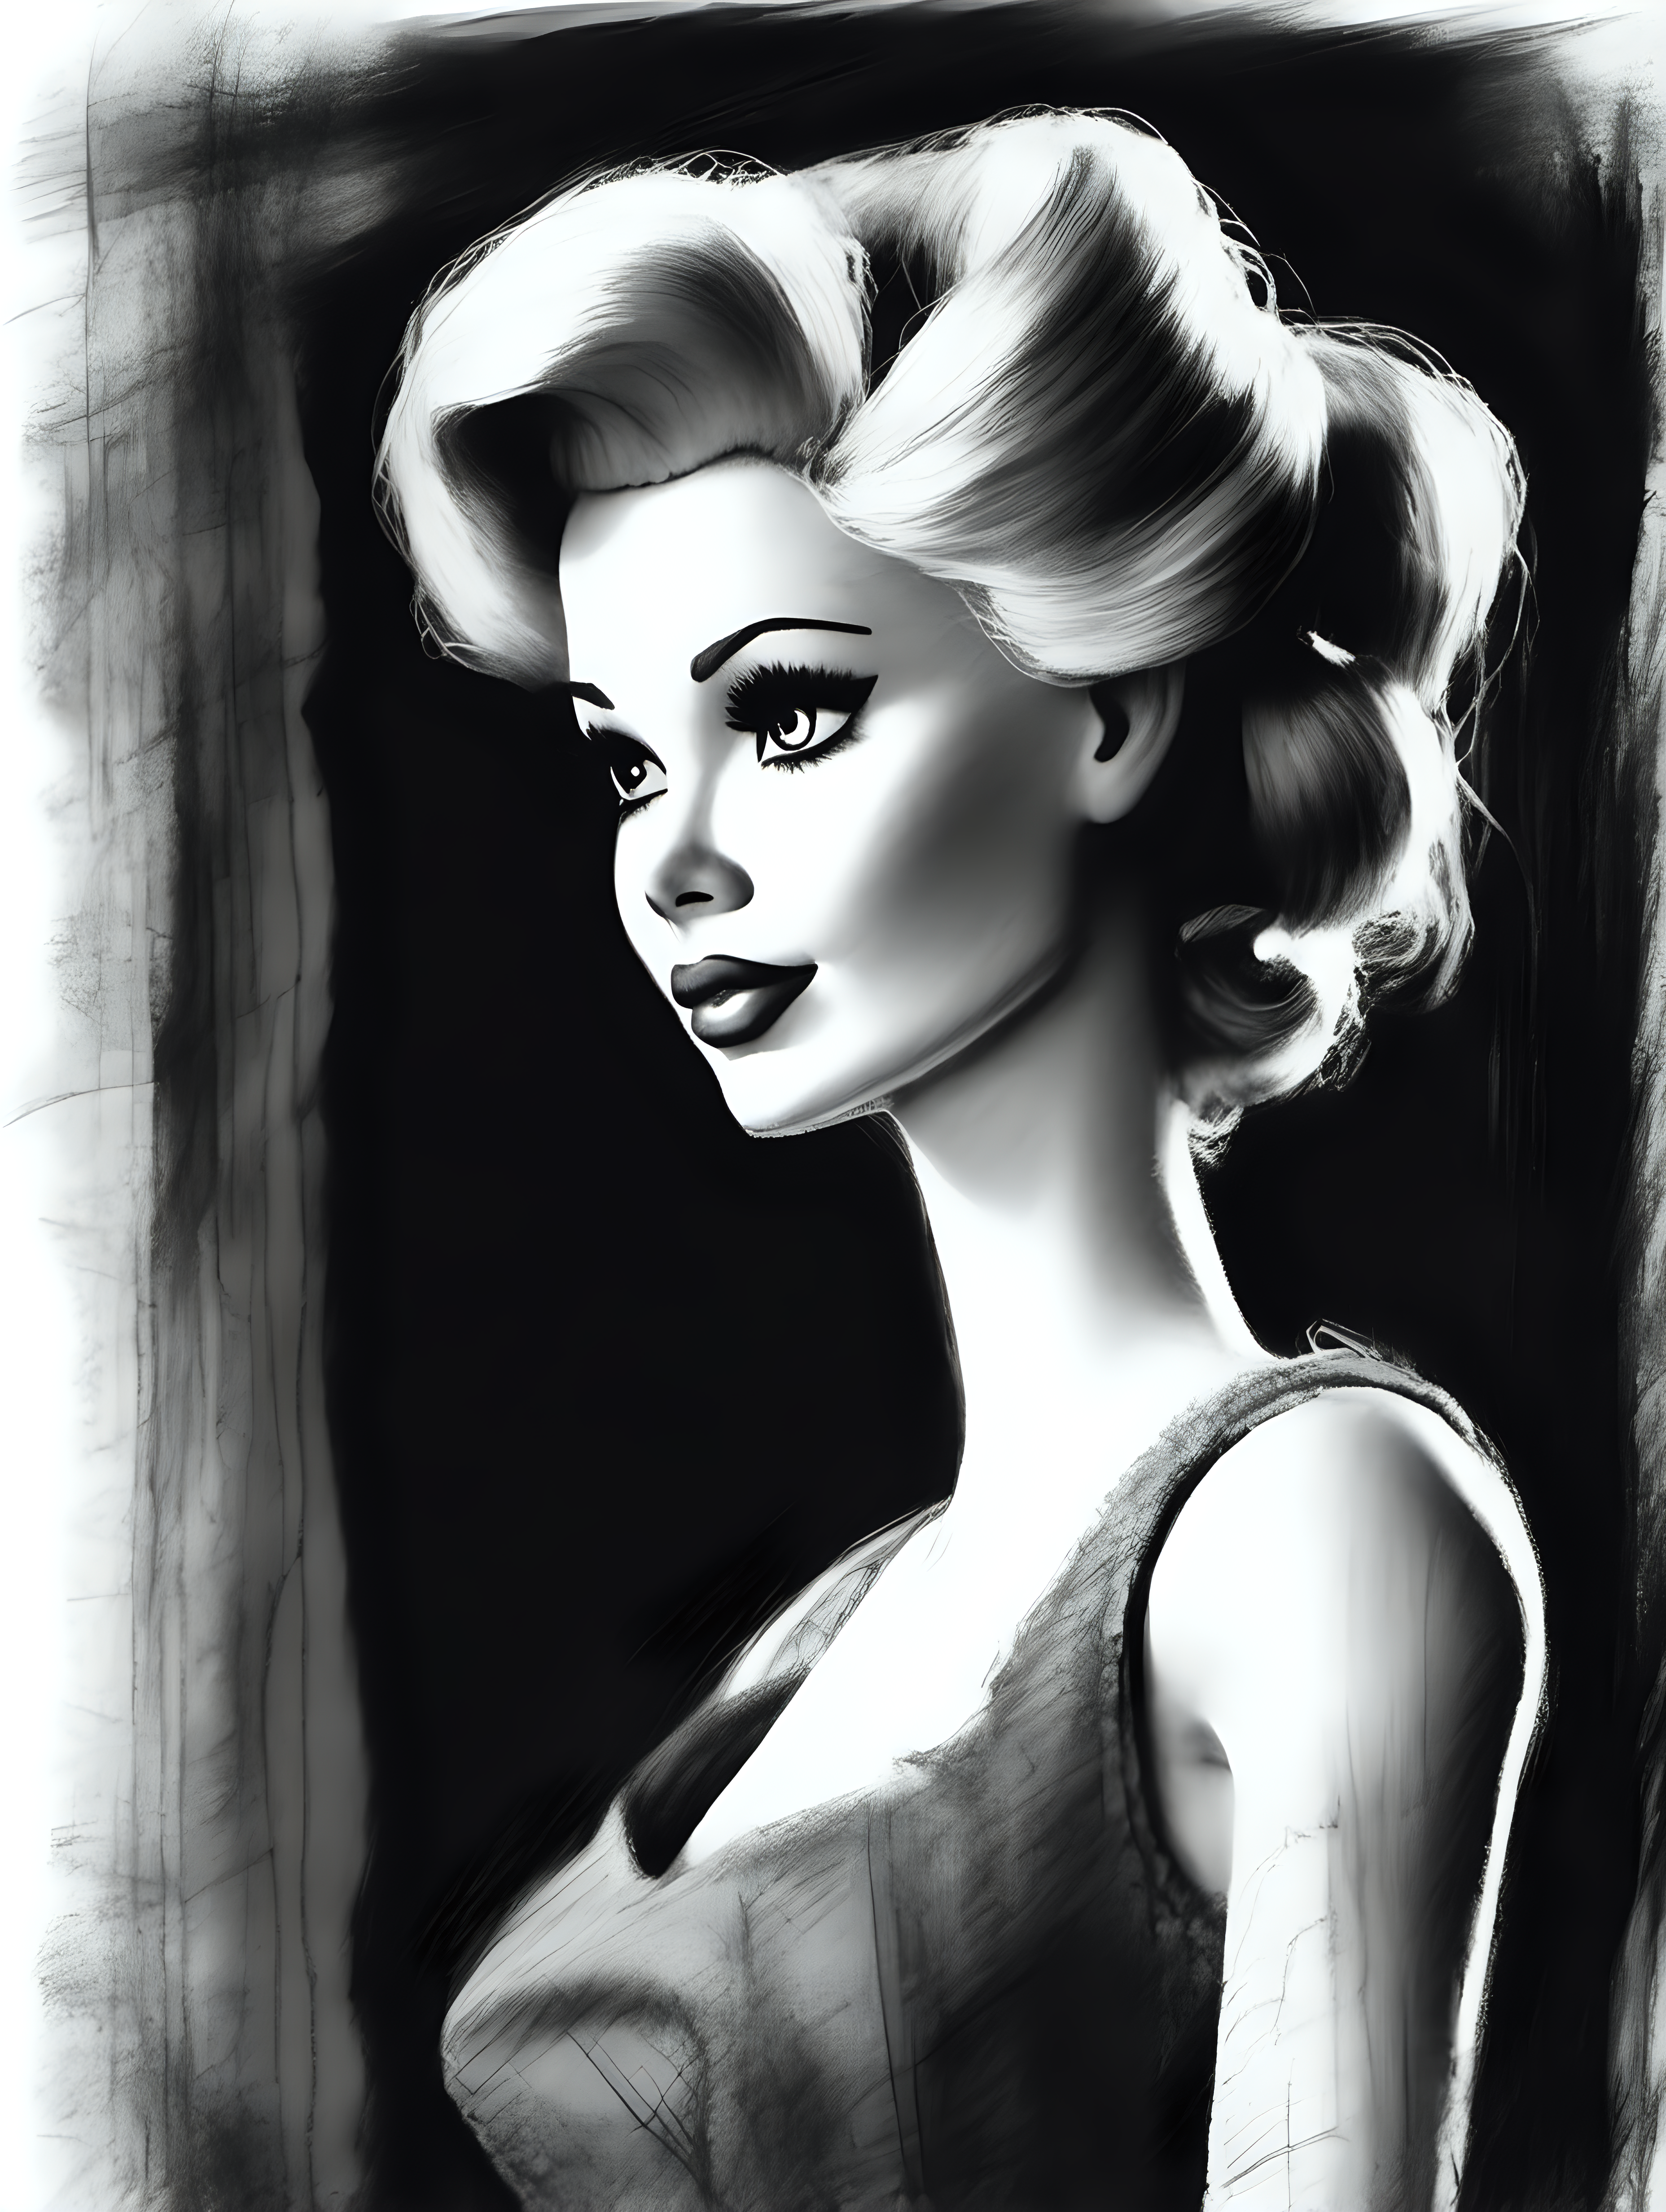 ROUGH MESSY ARTISTIC SKETCH OF A CLASSIC BARBIE DOLL. FILM NOIR SILOUETTE STYLE. HAND-SKETCHED. CHARCOAL, GRAPHITE AND LEAD PENCIL. 